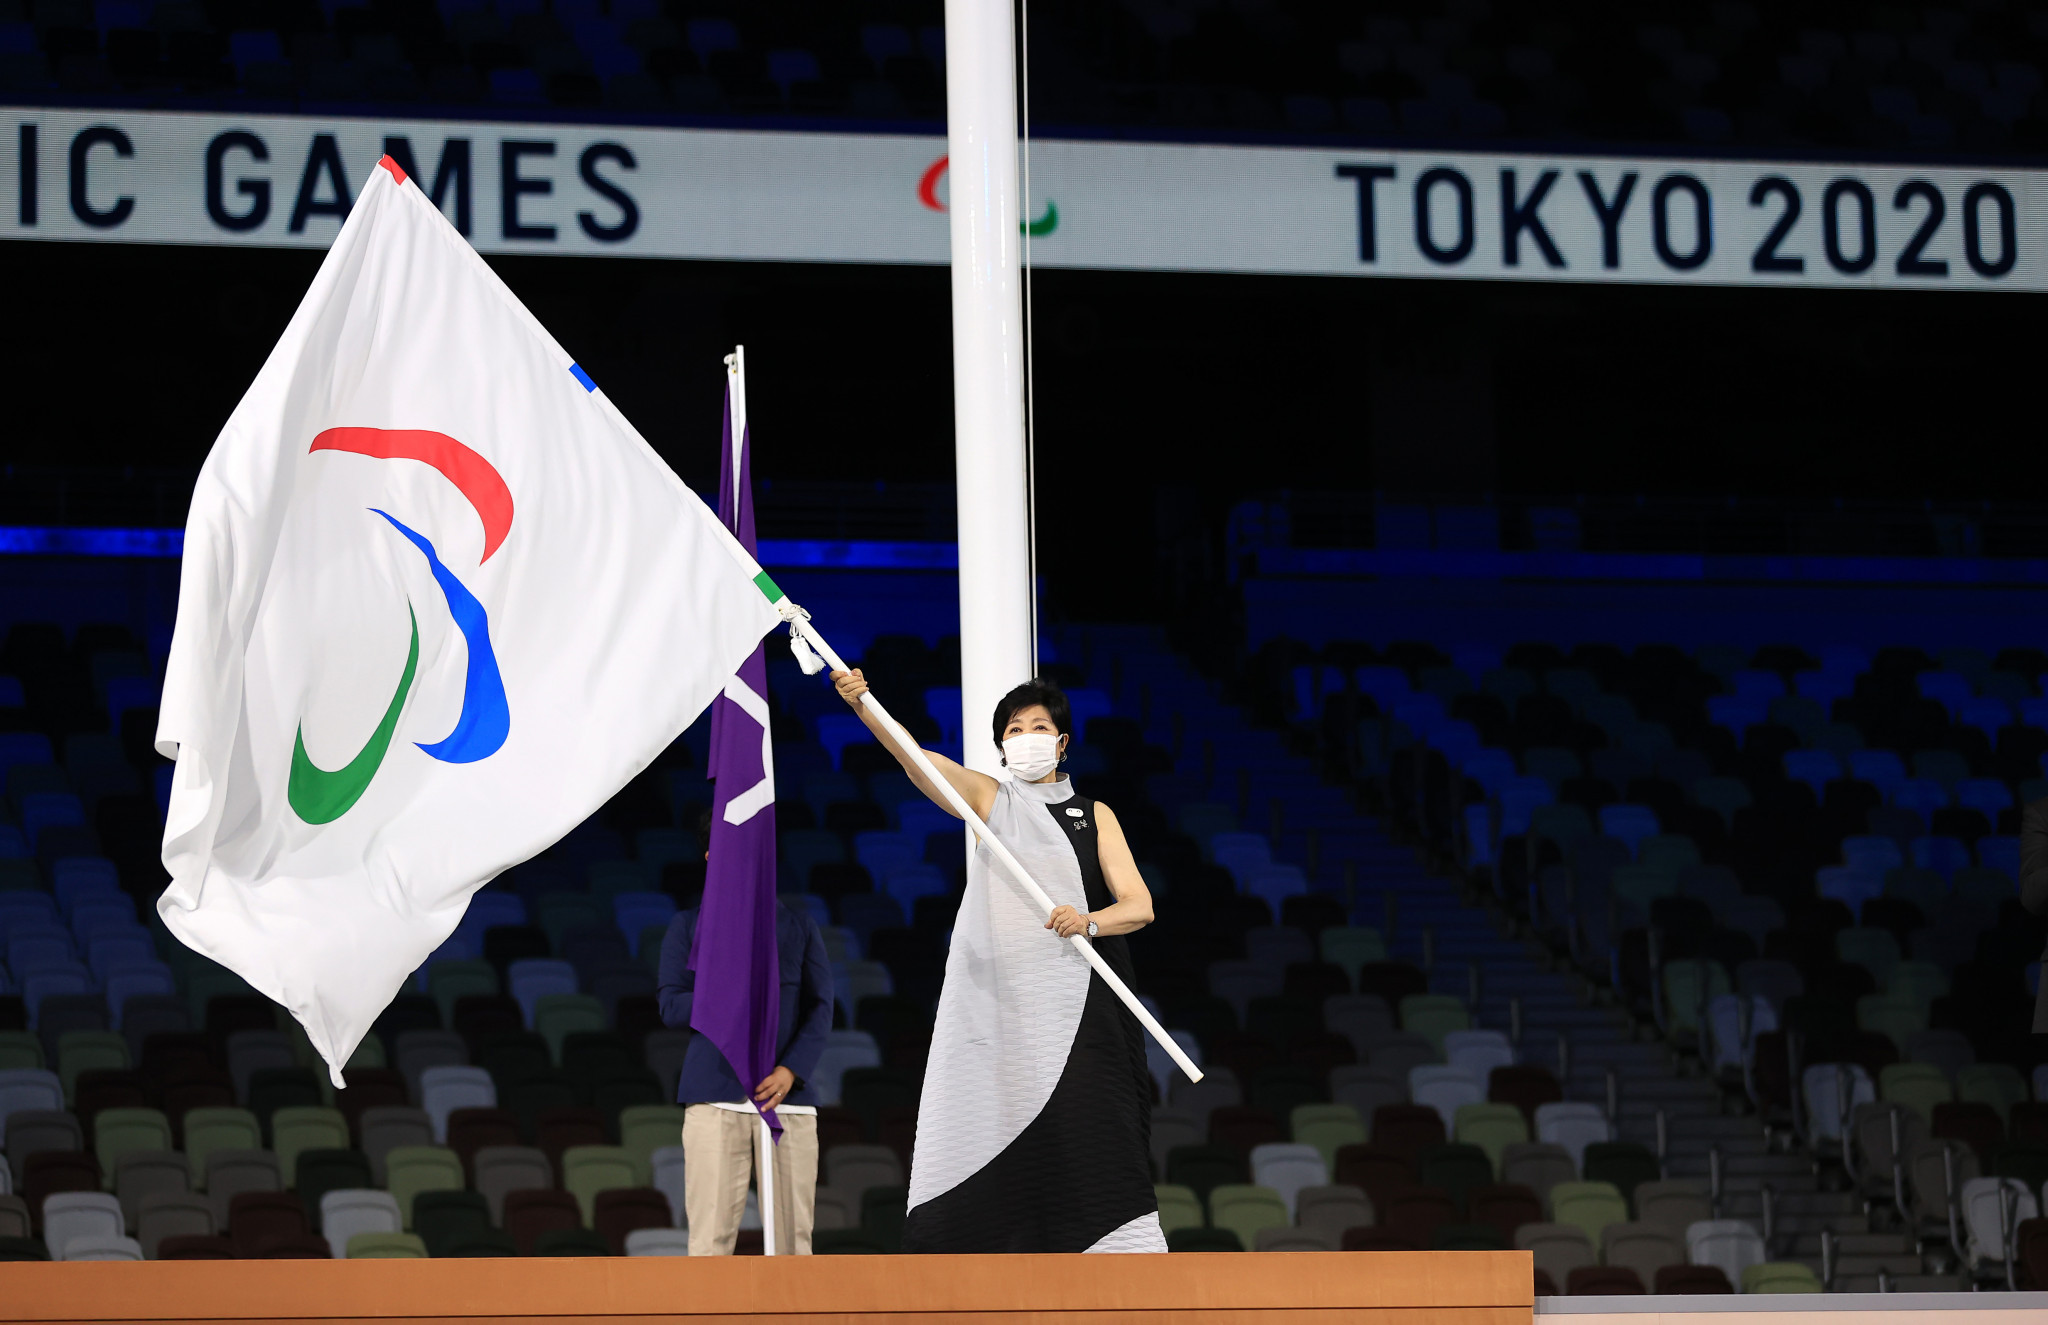 Yuriko Koike holding the Paralympic flag during Tokyo 2020 ©Getty Images